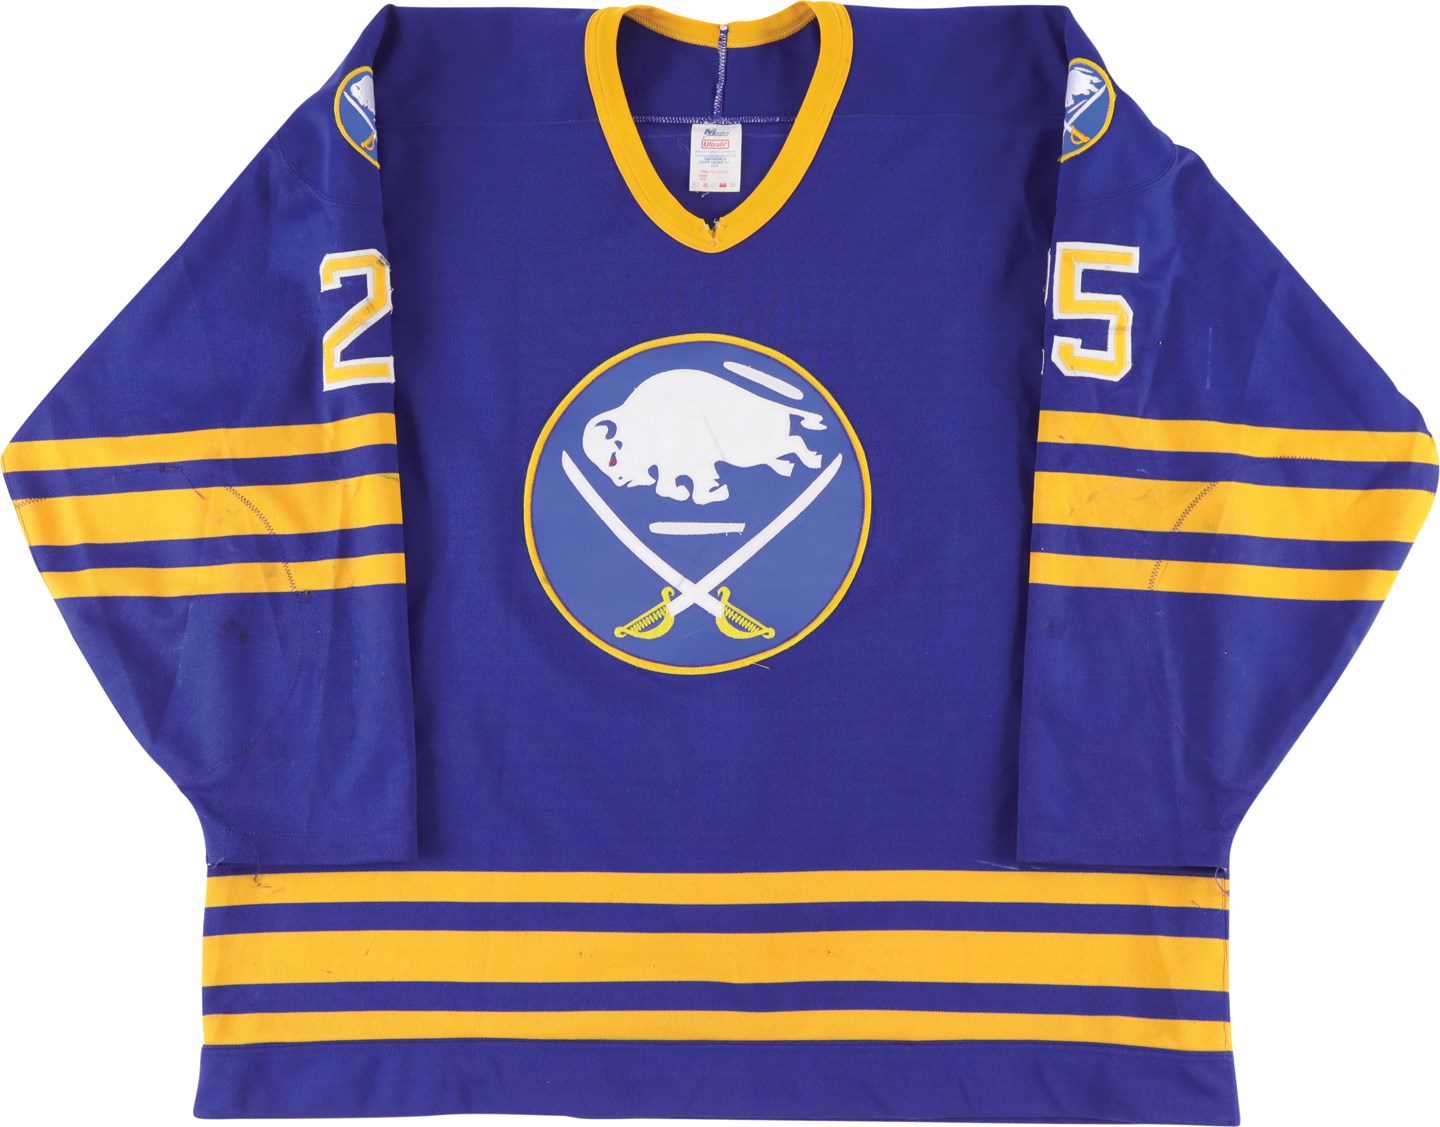 Hockey - 1989 Dave Andreychuk Photo-Matched Buffalo Sabres Game Worn Jersey - Matched to Game 1 of 1989 Semi-Finals! (Photo-Matched)